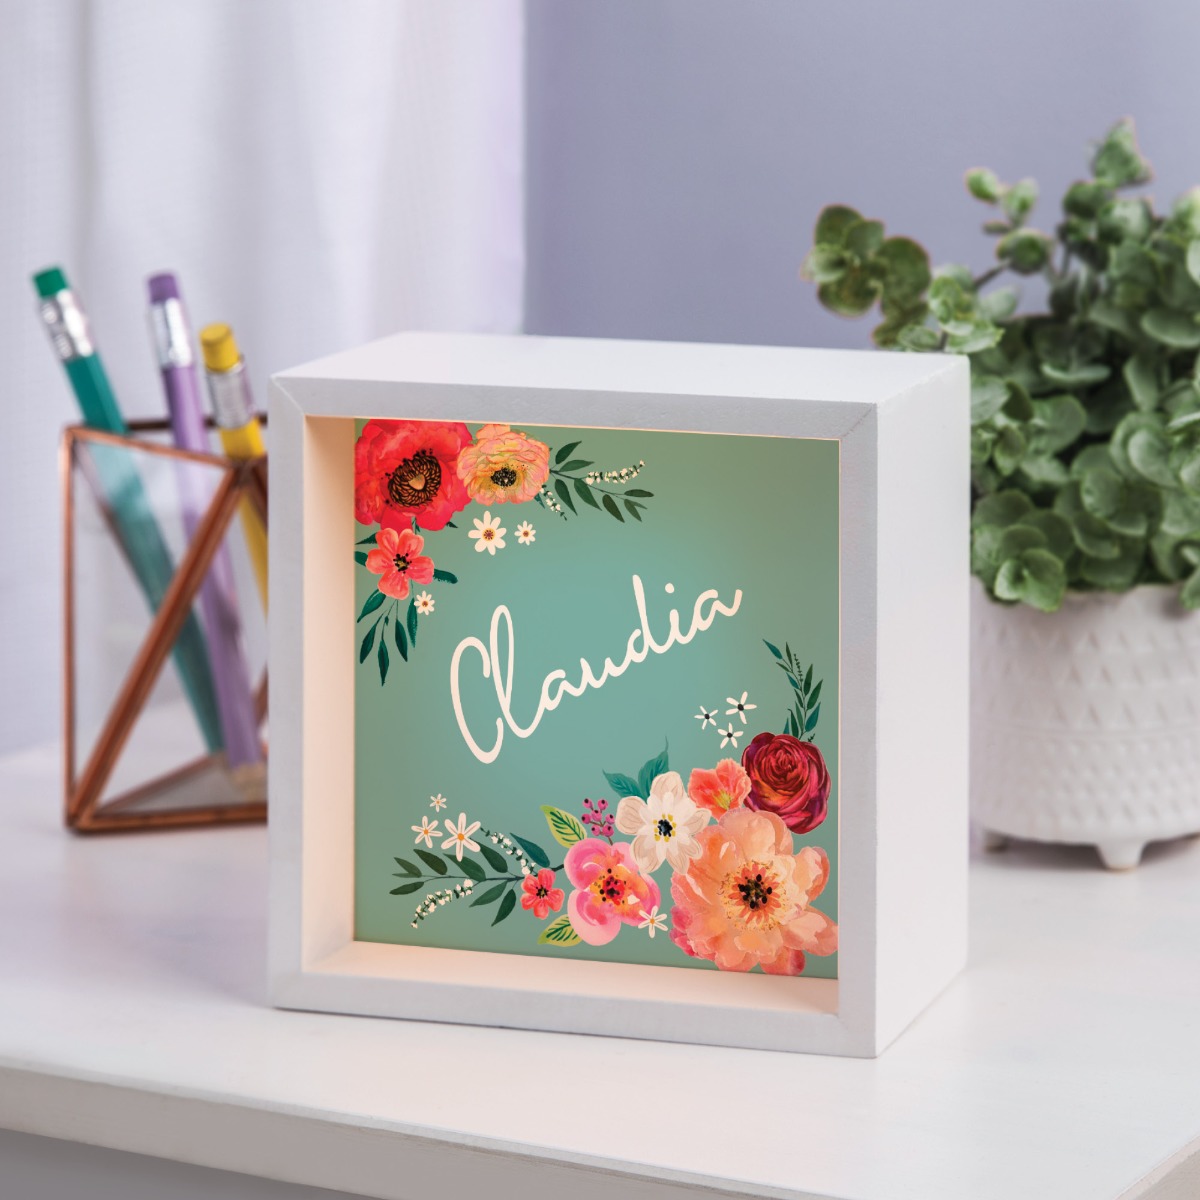 Floral light up shadowbox with name 